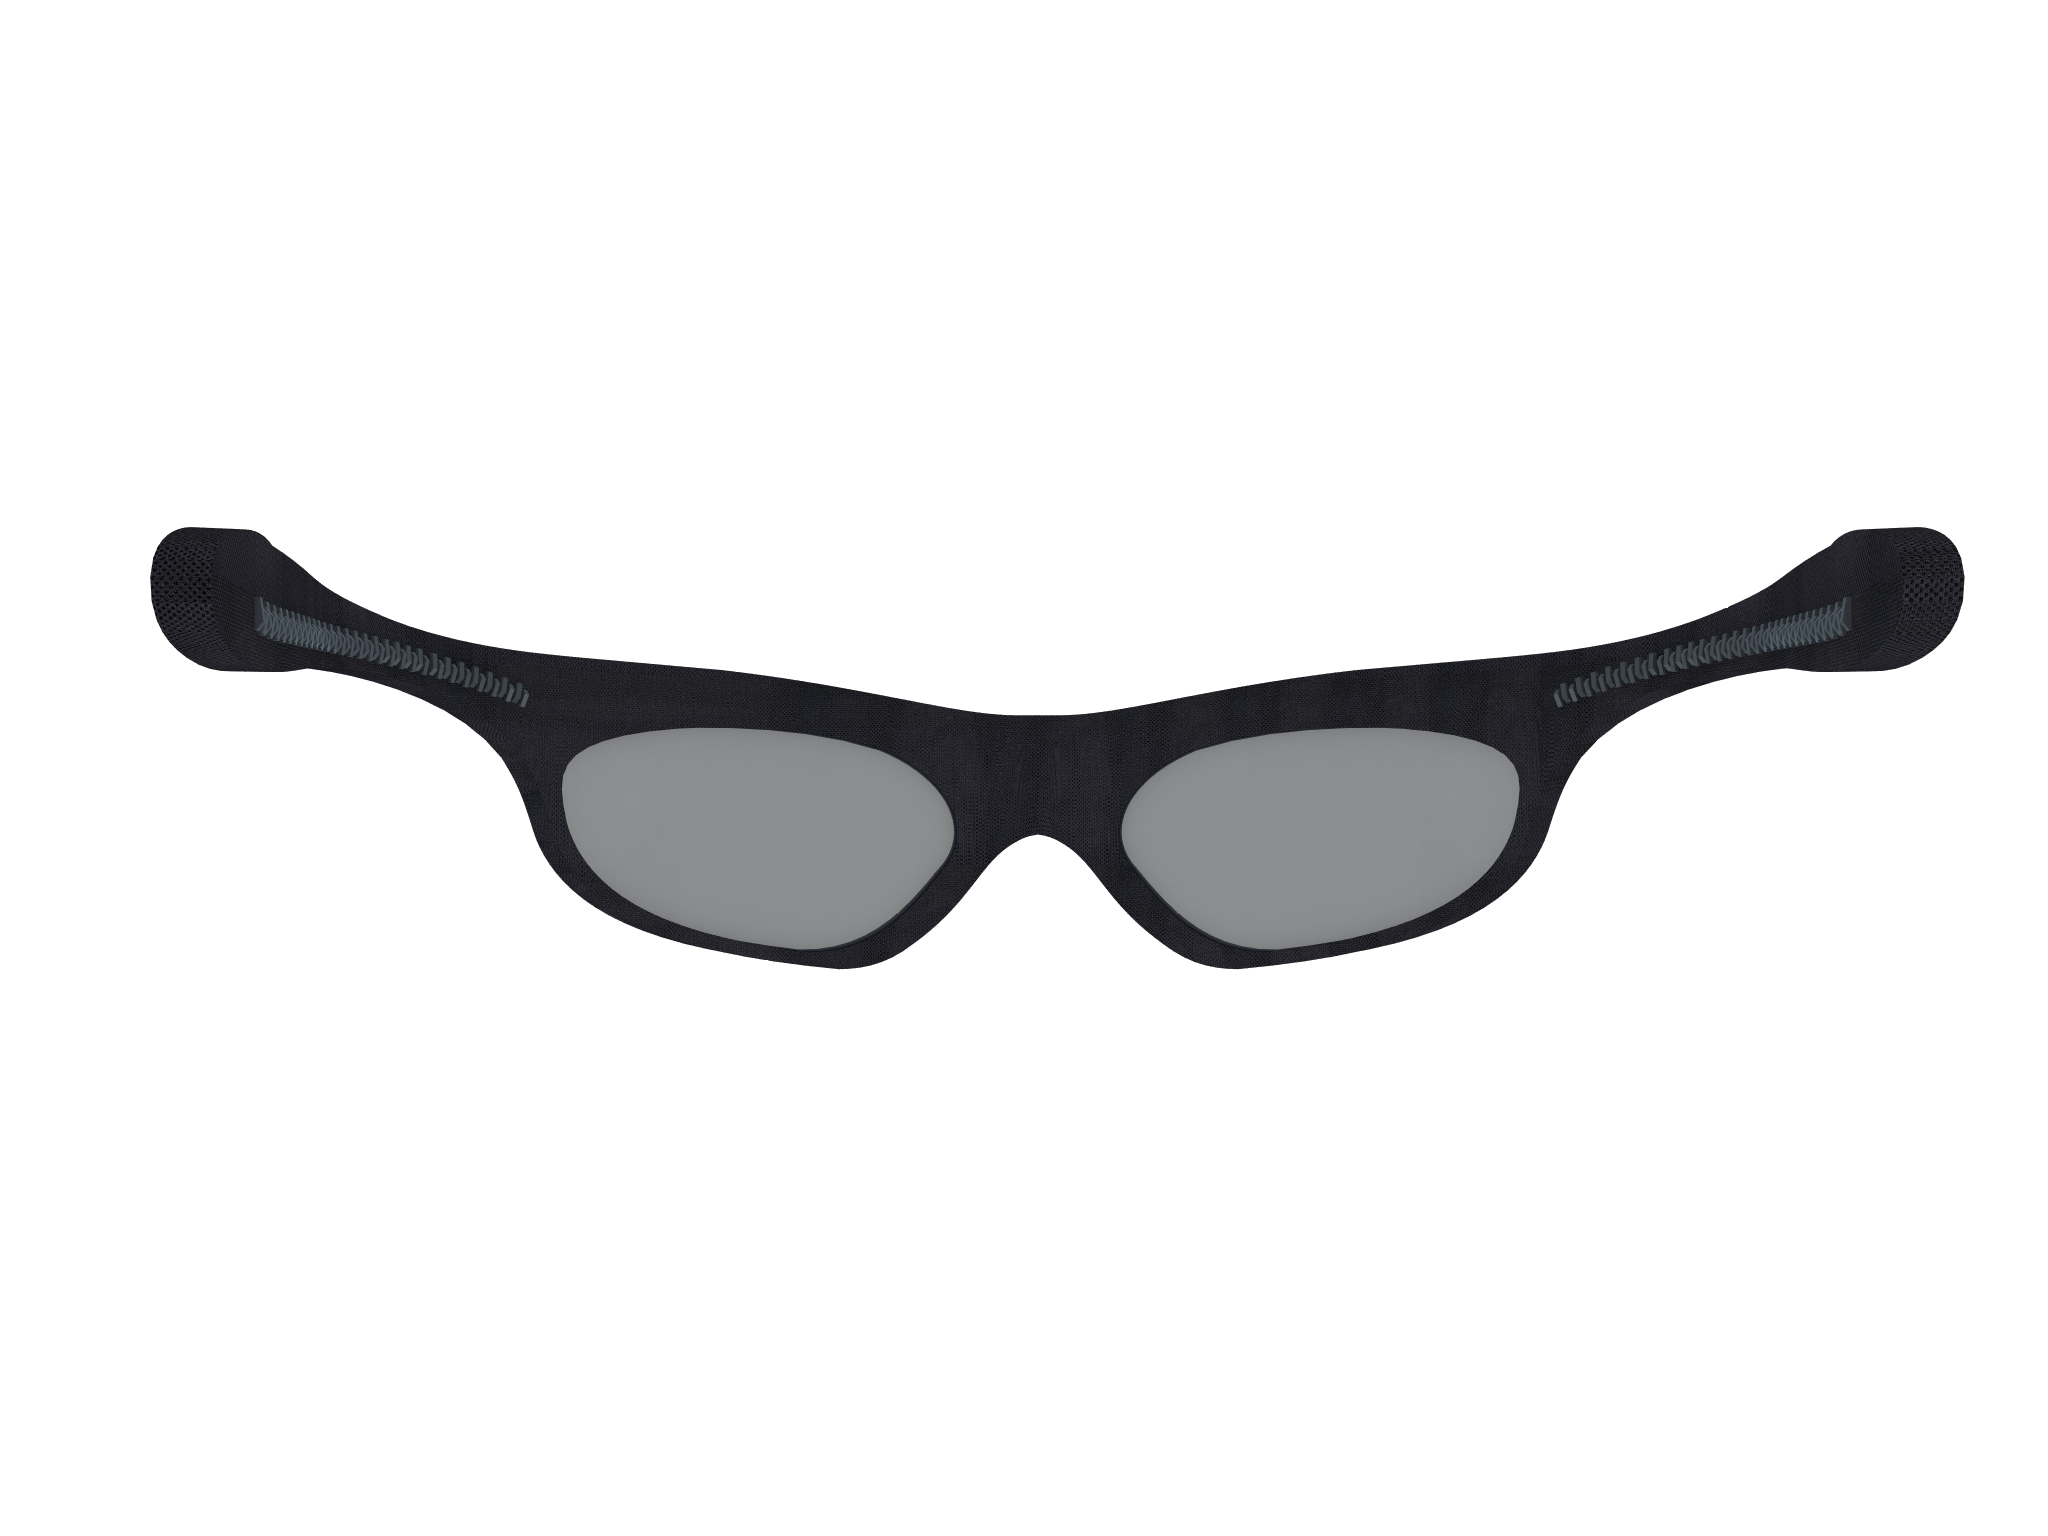 Morning Rise is an eyewear invention made to help users find their eyeglasses in the morning